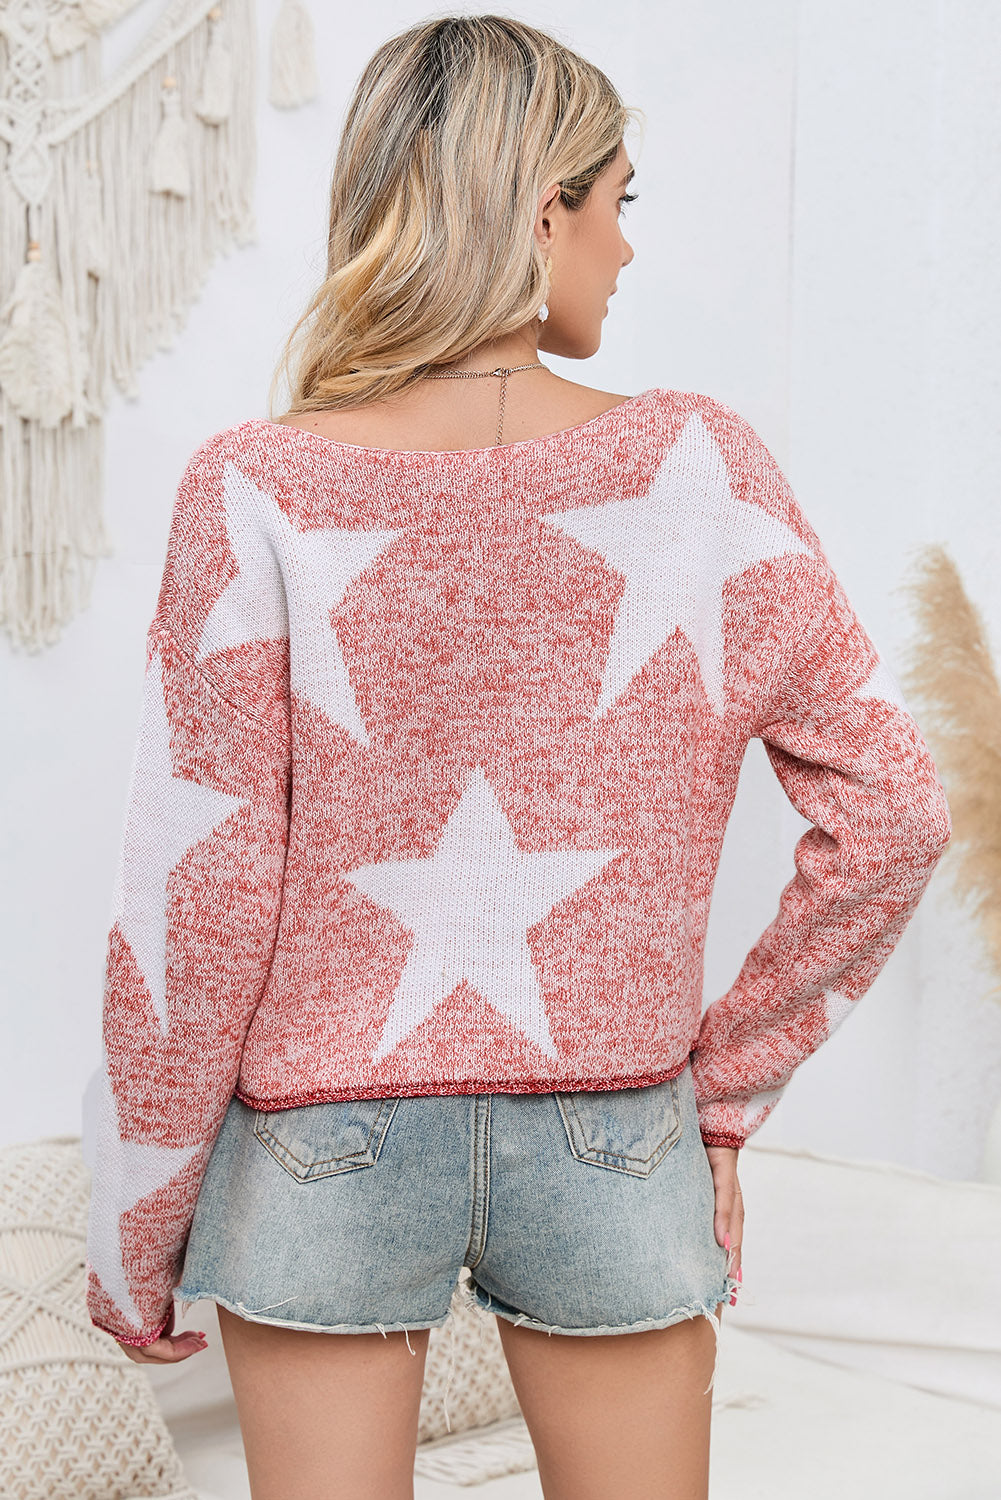 Star Power Knit Top